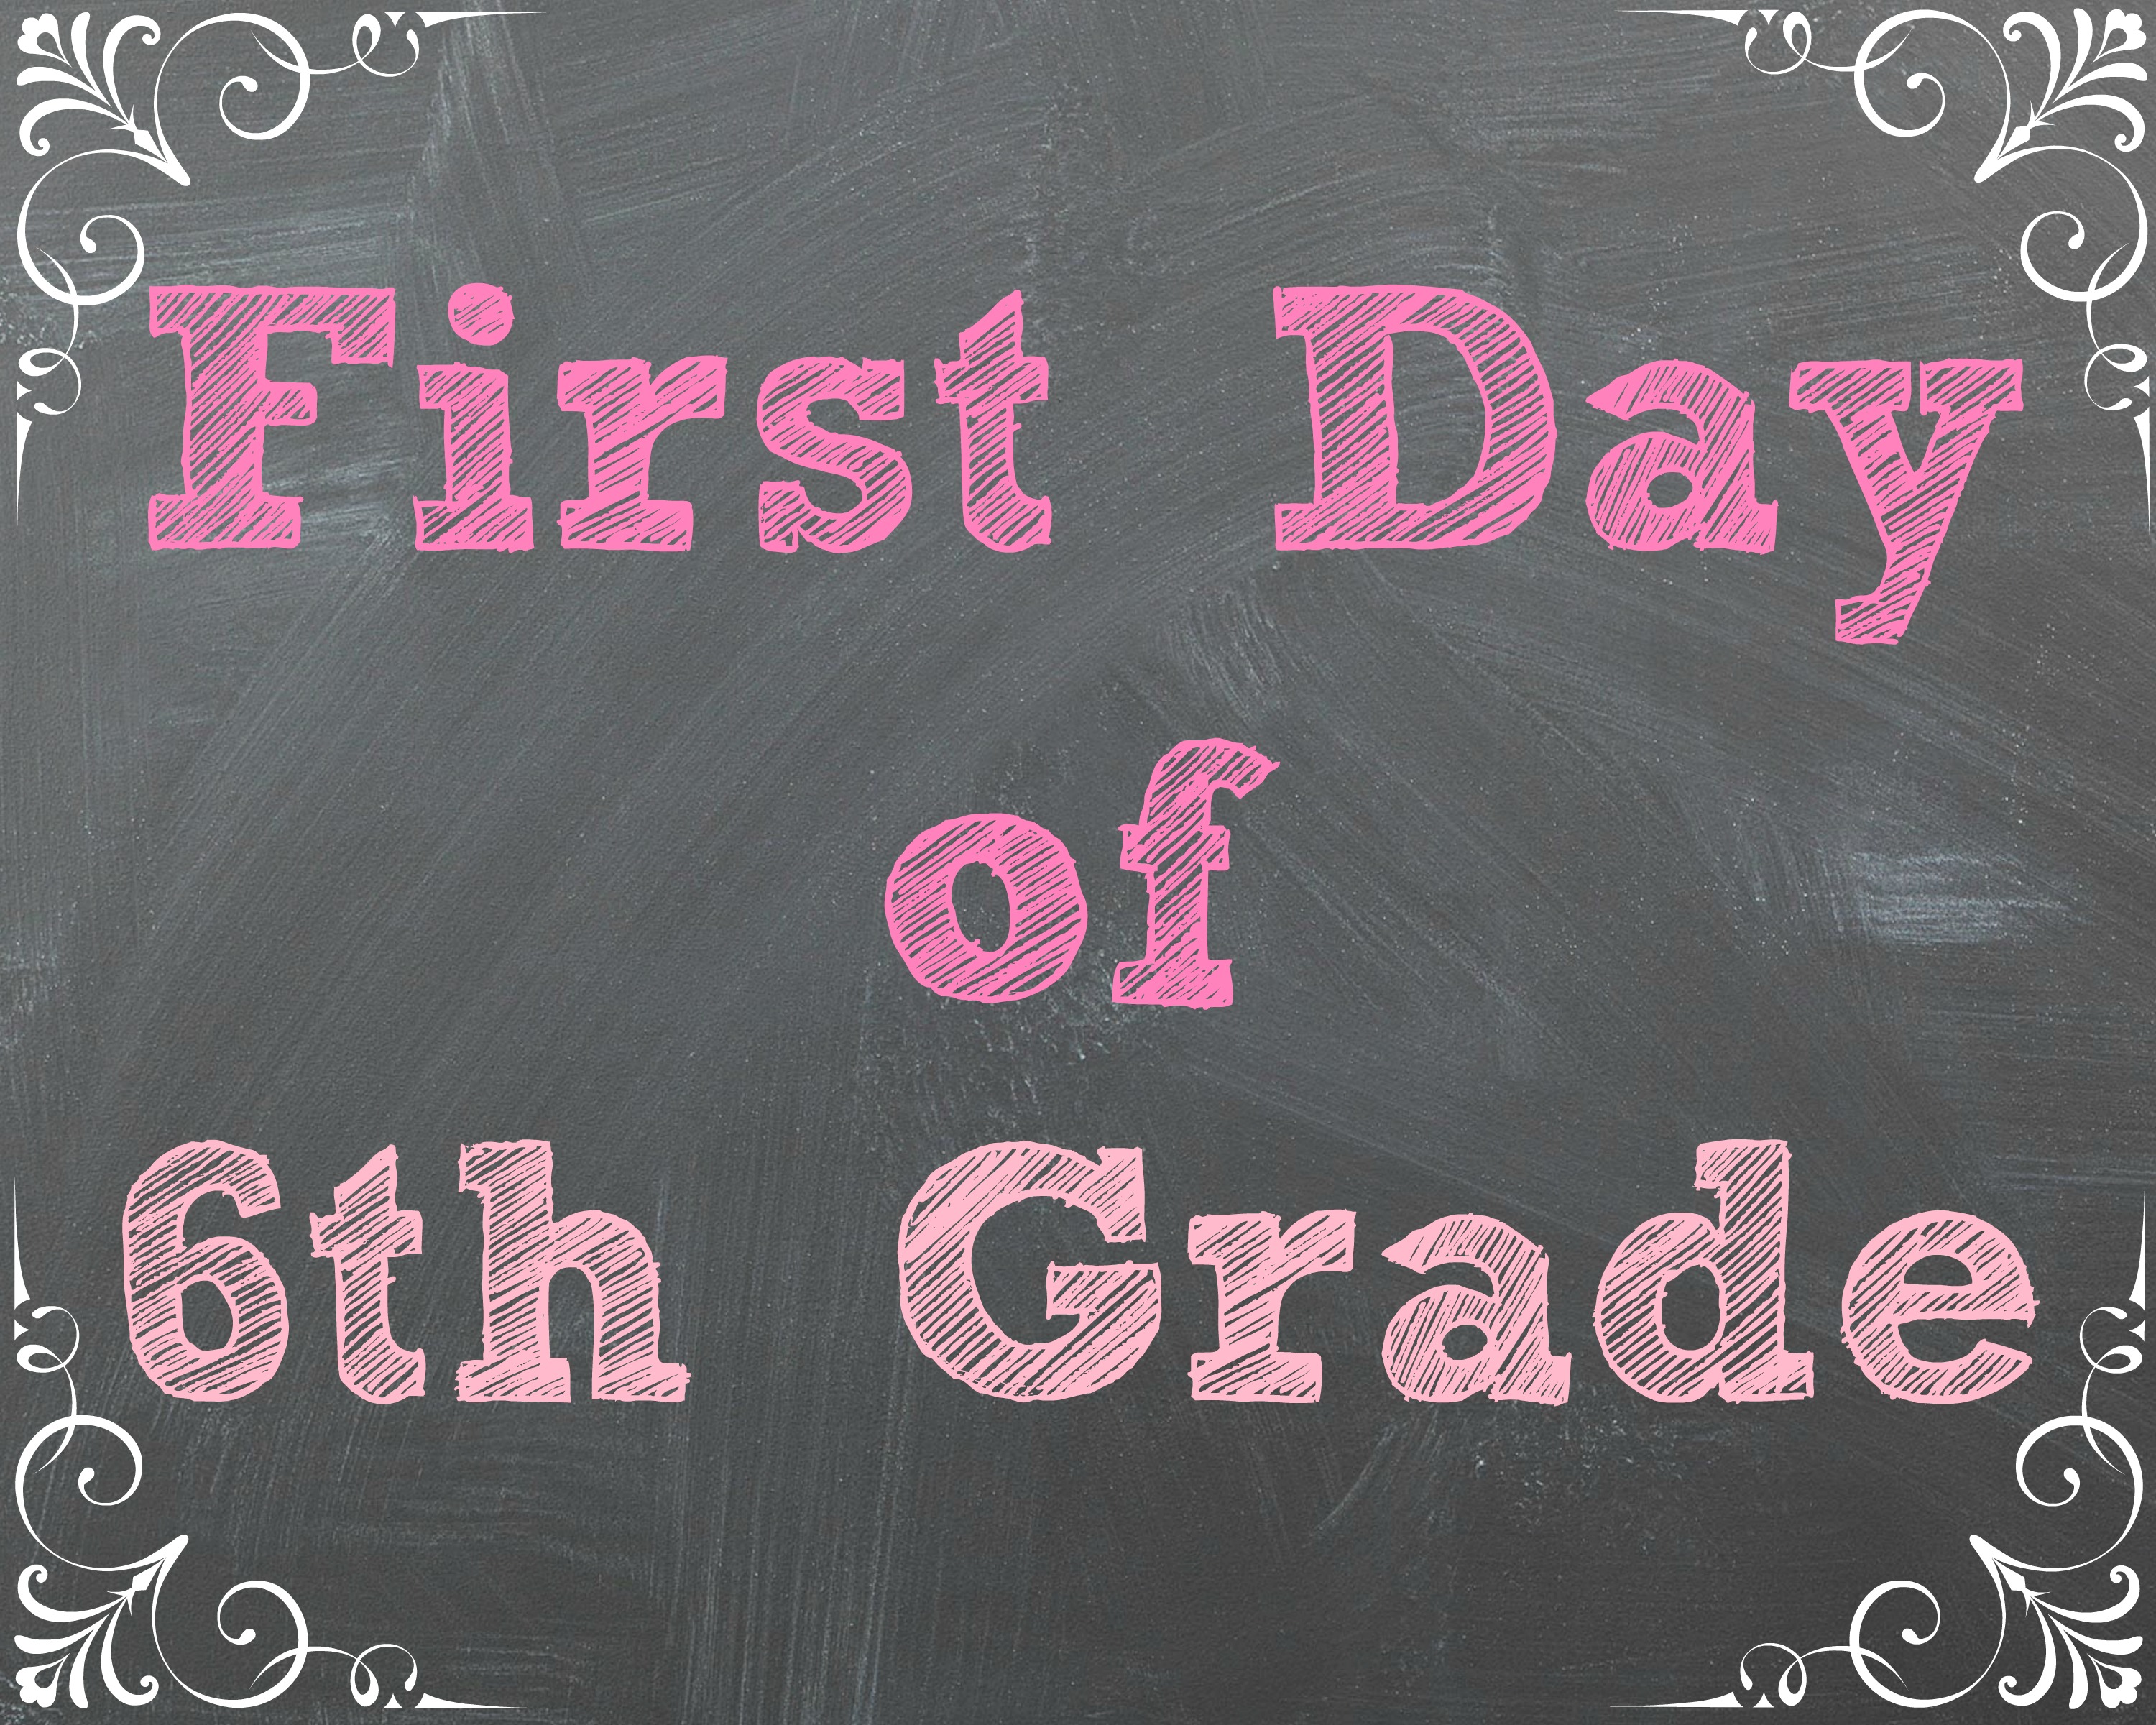 First Day Of School Sign